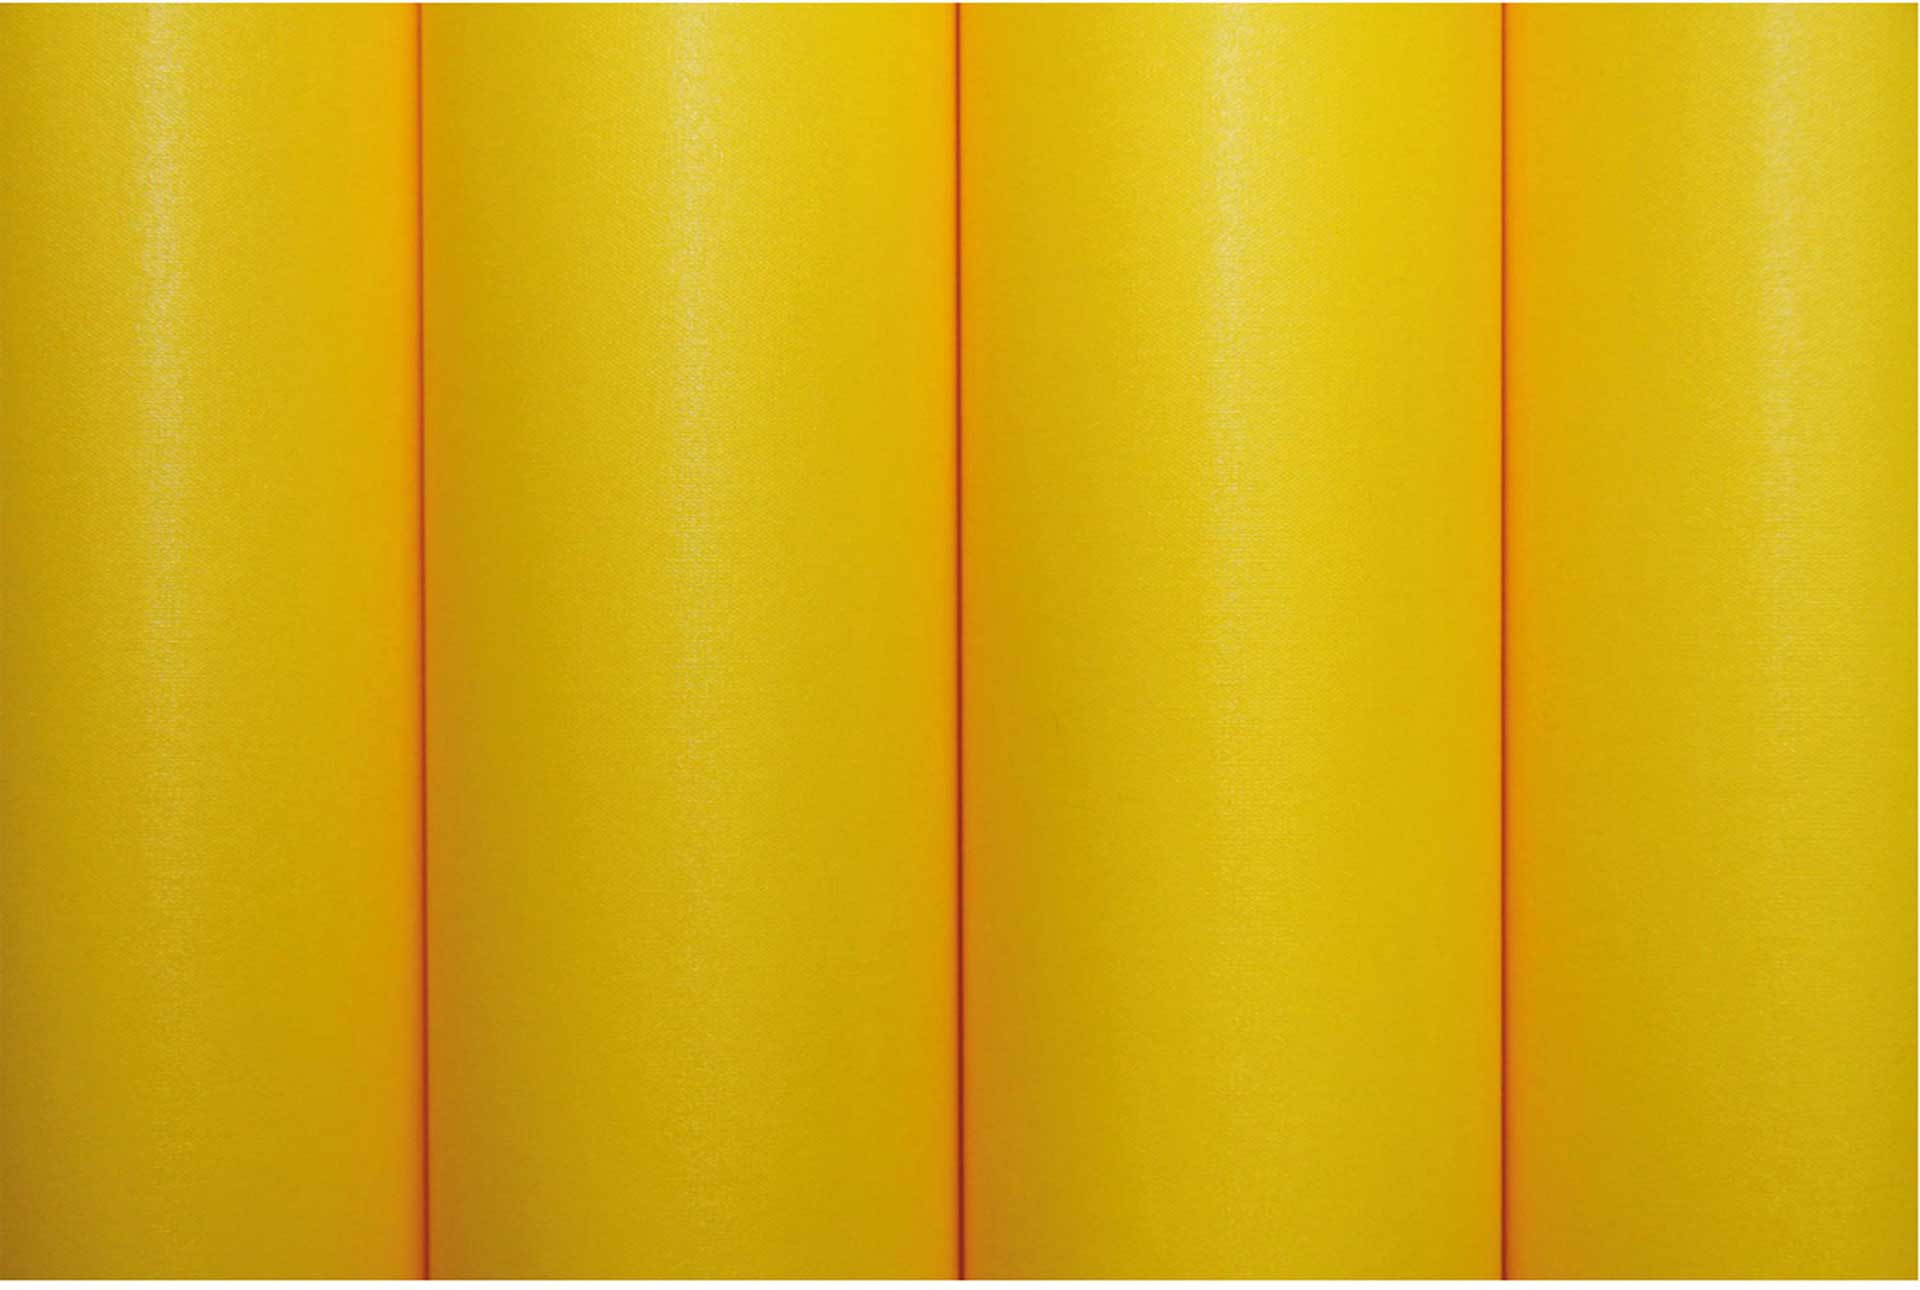 ORACOVER Oratex Fabric foil classic Cub yellow #30A 2 Metres